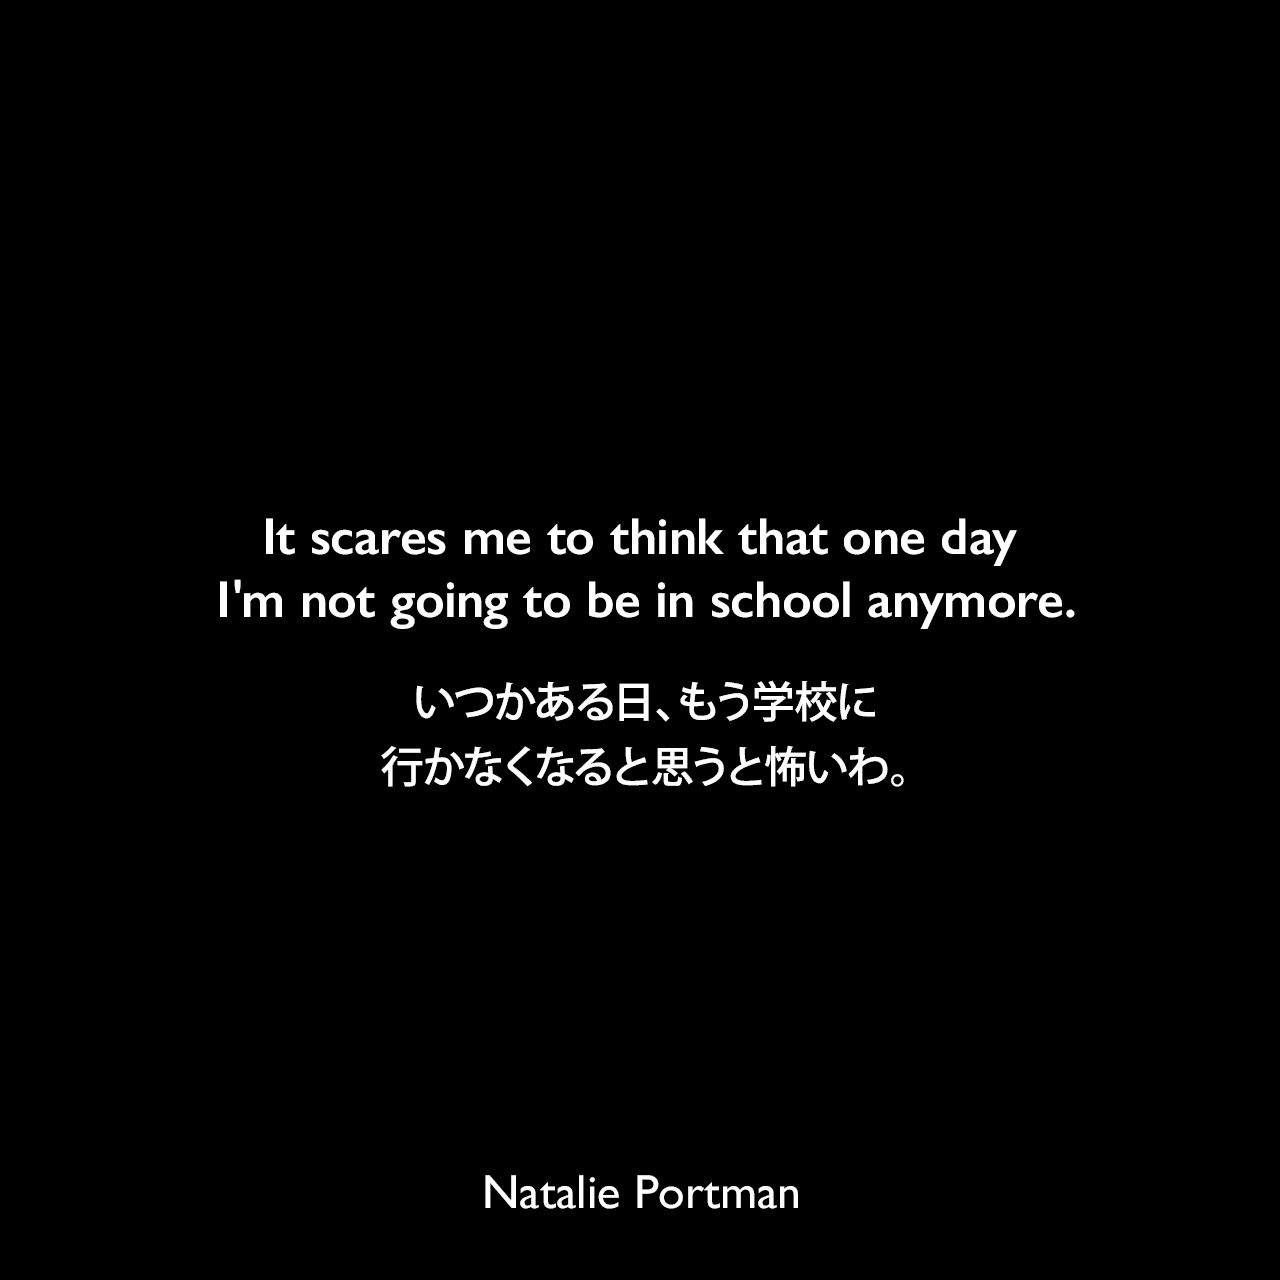 It scares me to think that one day I'm not going to be in school anymore.いつかある日、もう学校に行かなくなると思うと怖いわ。Natalie Portman